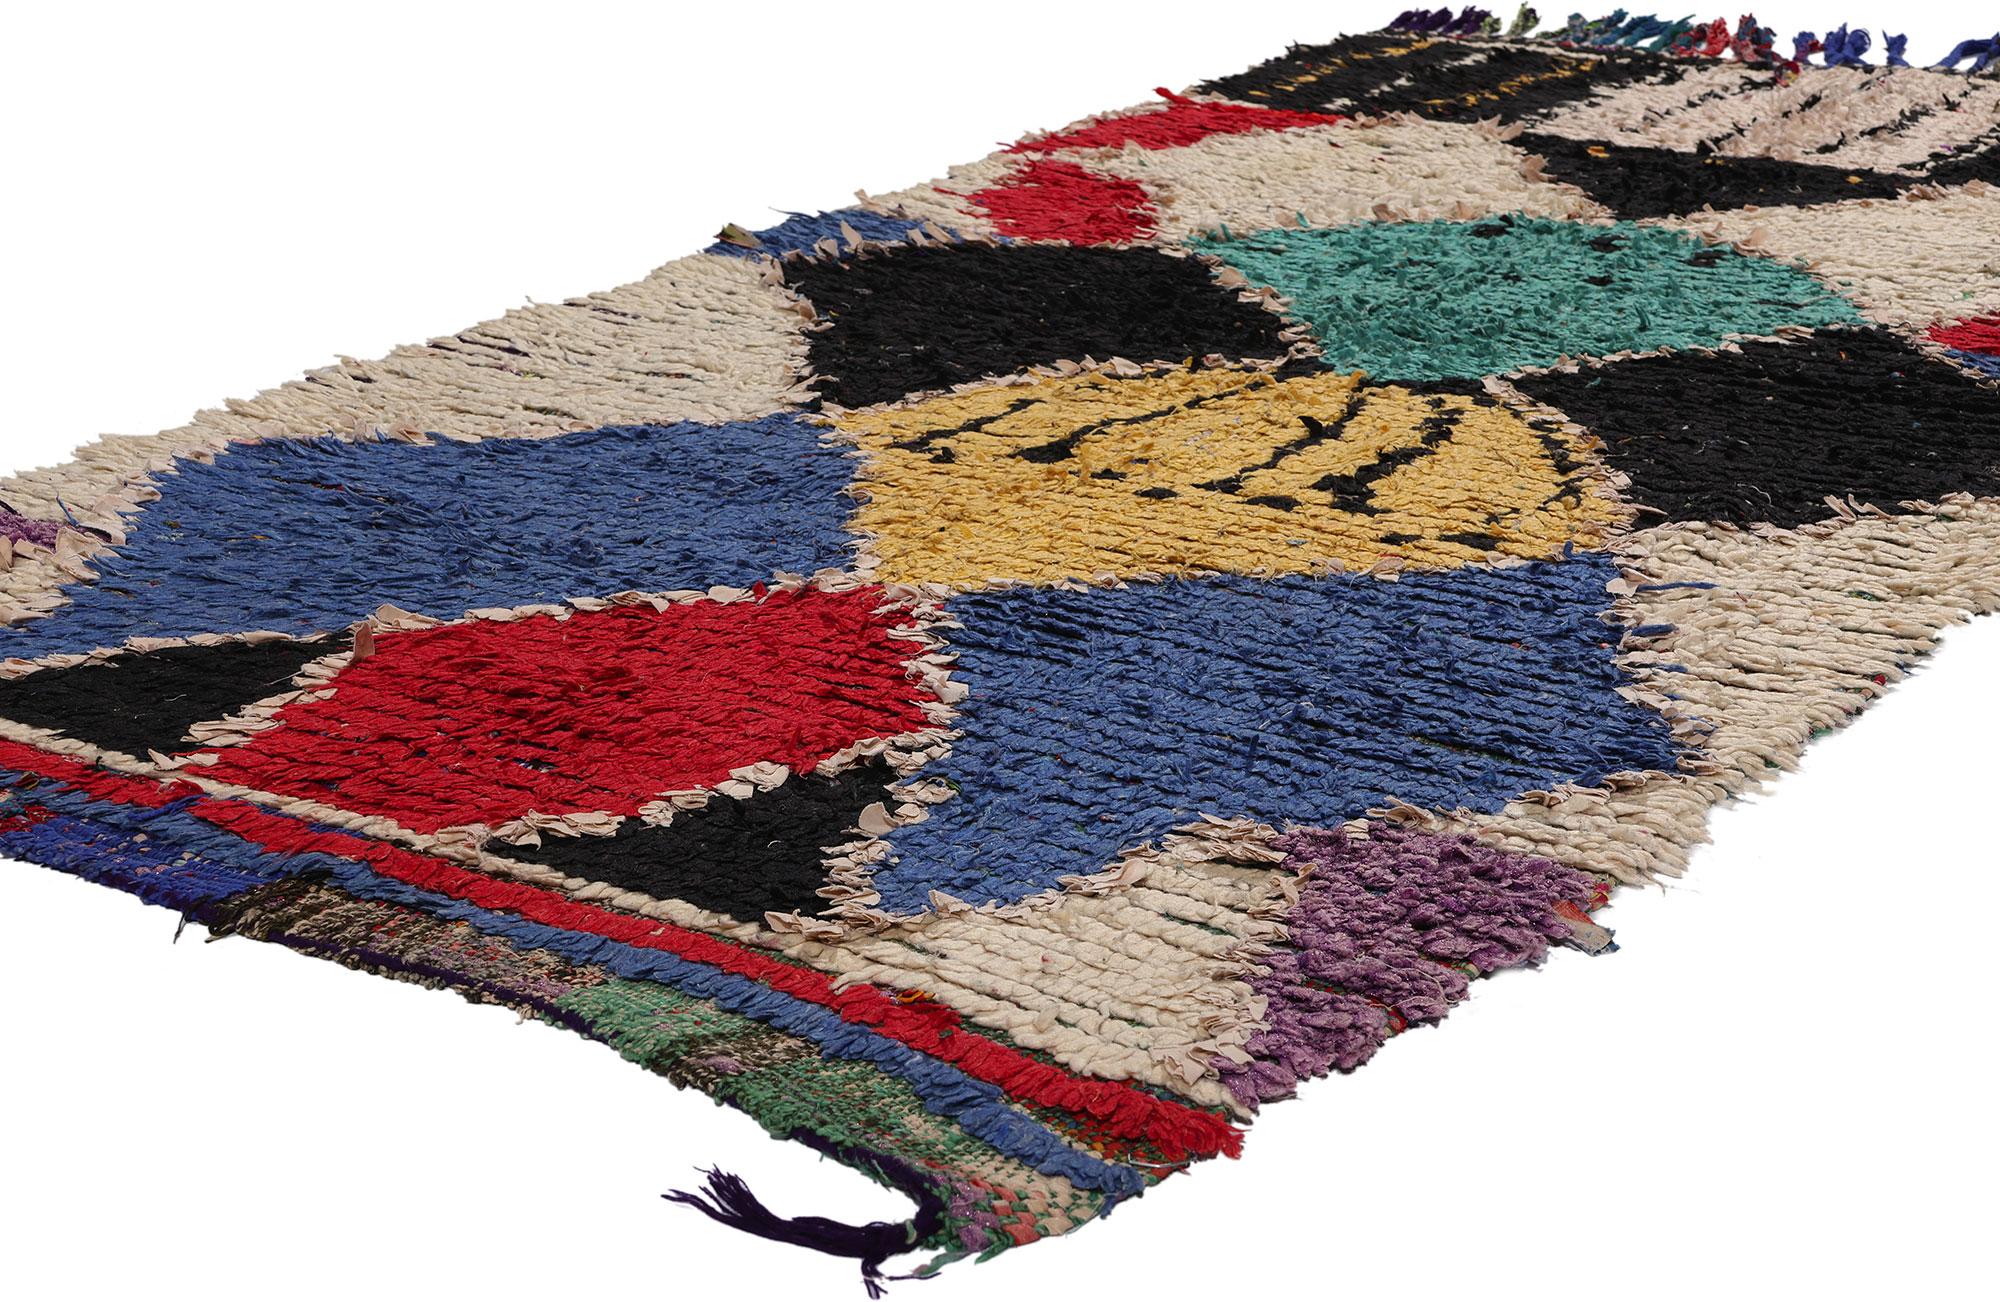 74811 Vintage Berber Moroccan Boucherouite Hallway Runner with Tribal Style 03'08 x 07'09. with its bold colors and graphic appeal, this hand-knotted vintage Berber Moroccan Boucherouite runner beautifully showcases the creative and authentic spirit